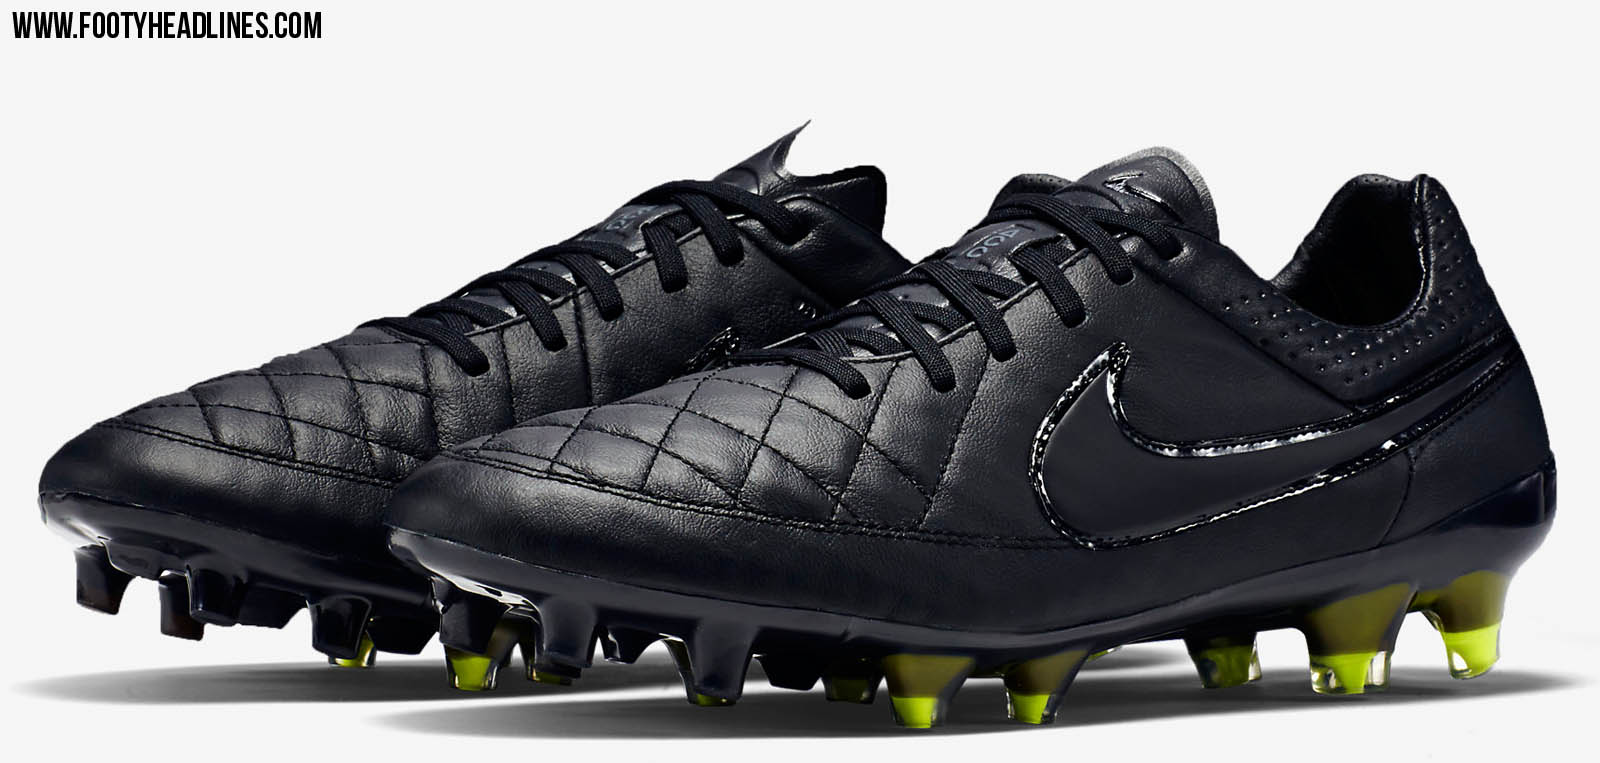 Blackout Reflective Nike Tiempo 2015 Boots Released - Footy Headlines